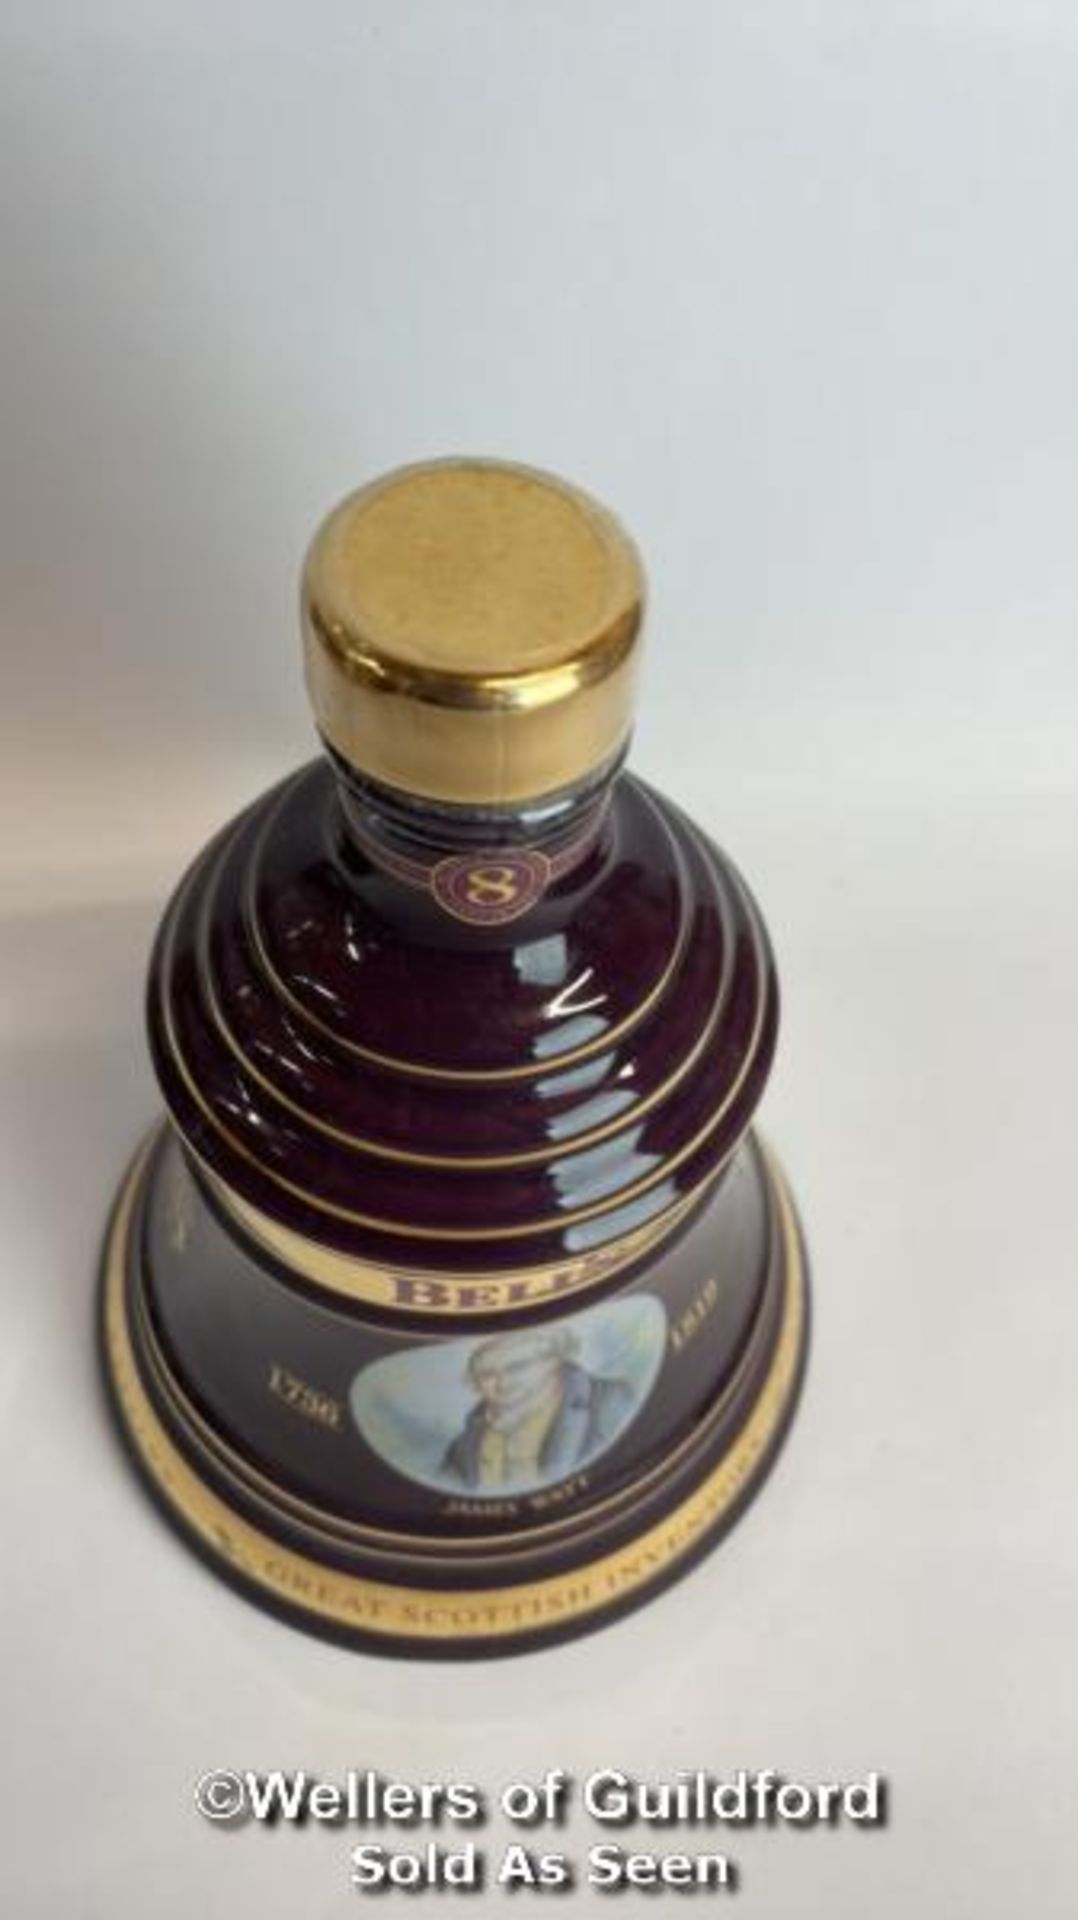 Bell's 2002 Old Scotch Whisky Limited Edition Christmas Decanter, Aged 8 Years, Brand New and Boxed, - Image 8 of 8